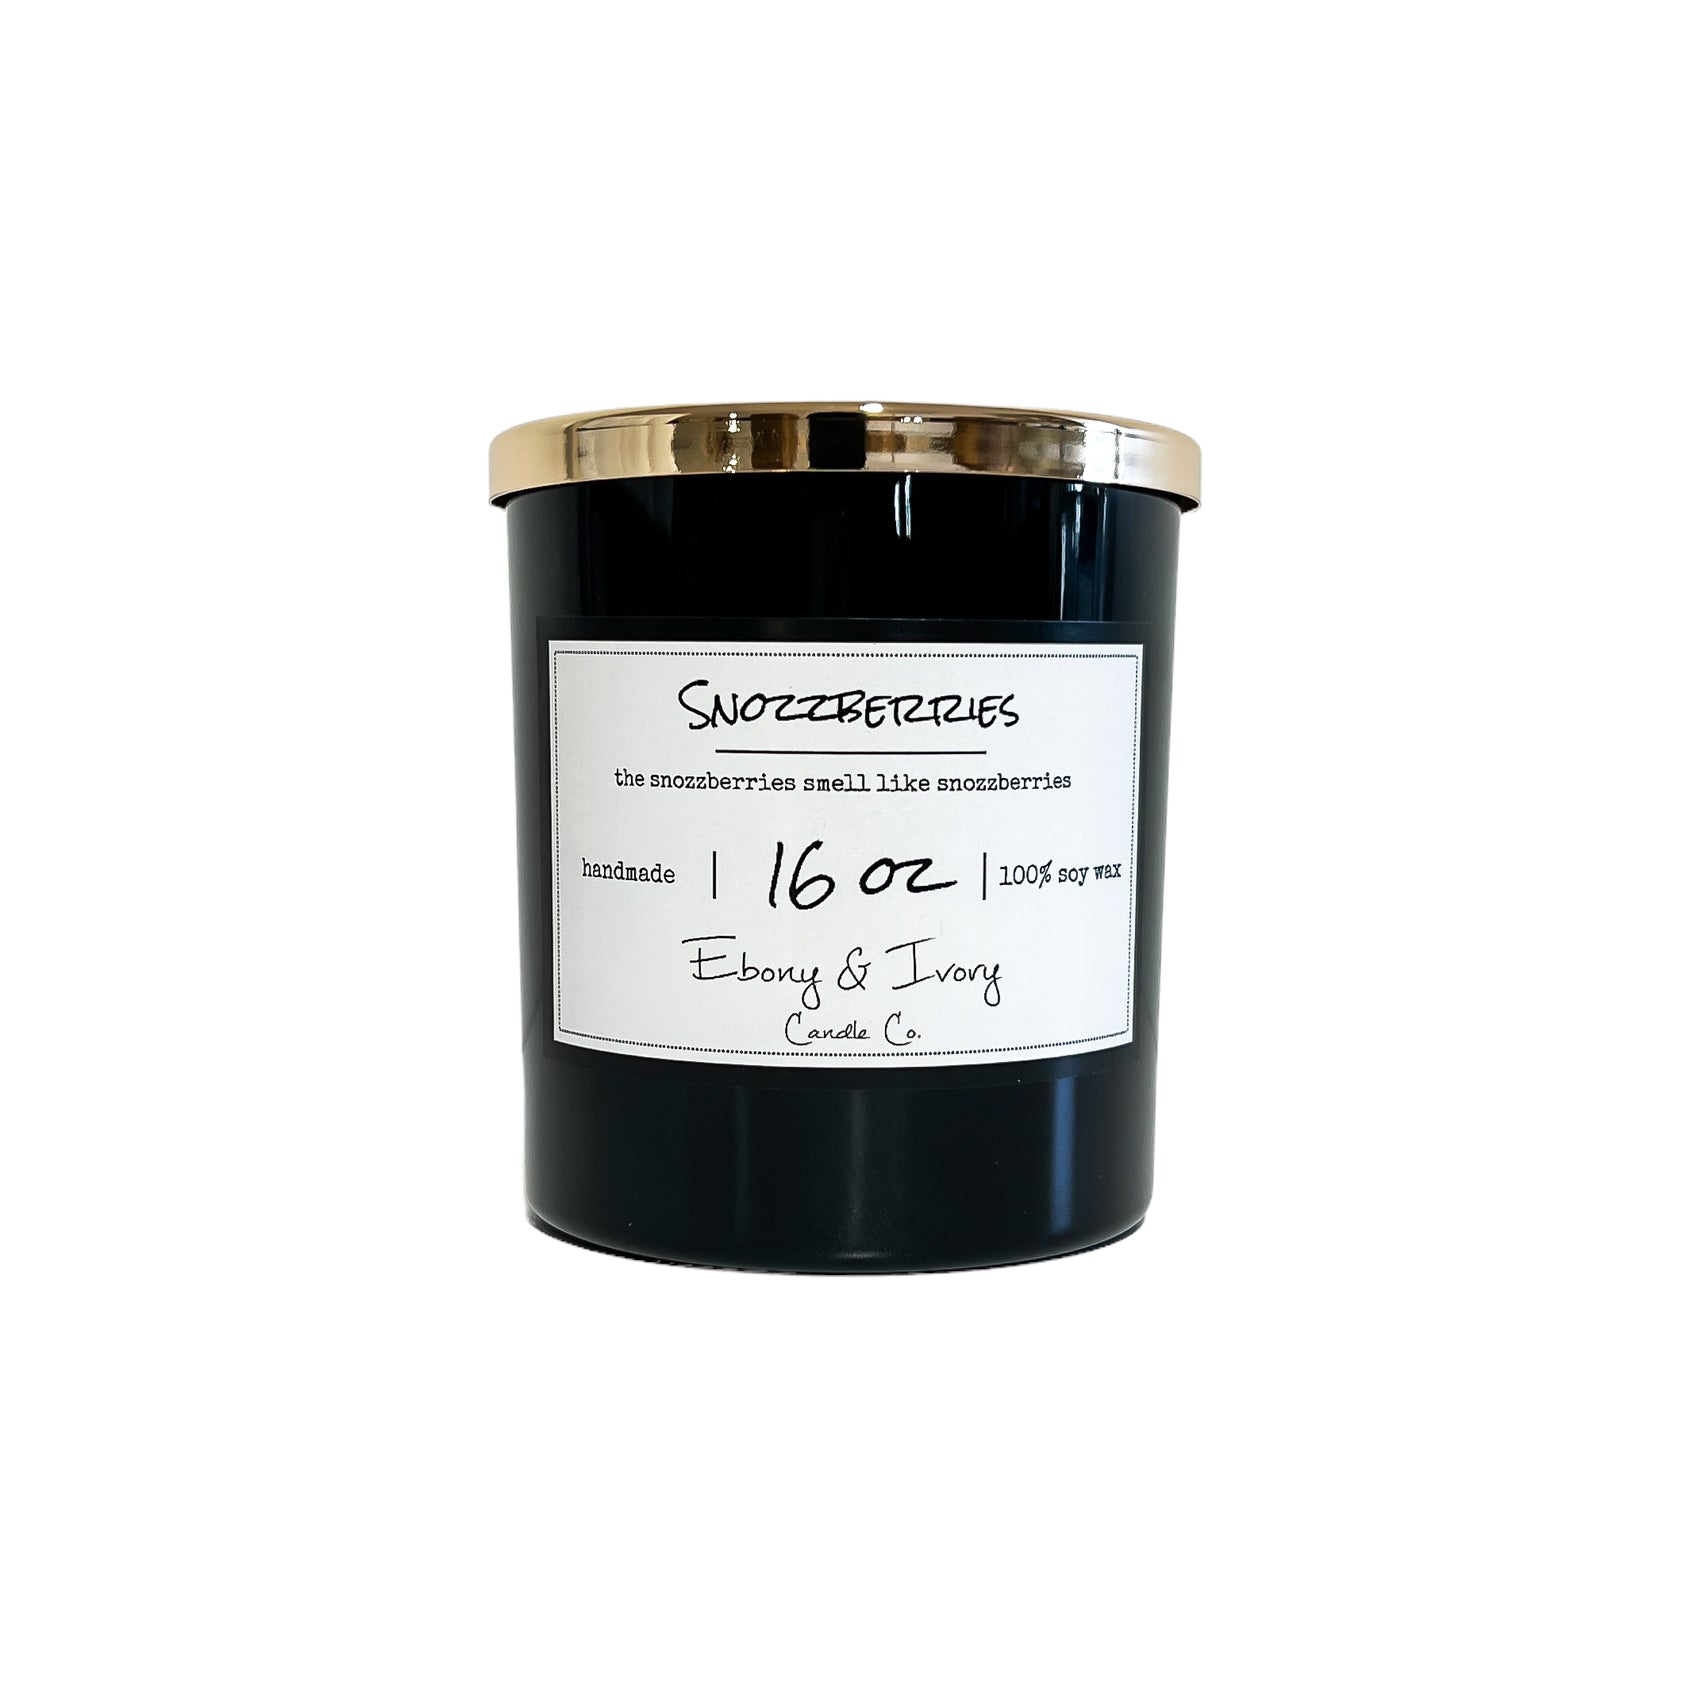 Black, sixteen ounce, nectarine, pomegranate, and berries scented soy wax candle with a gold lid and a white label that reads Snozzberries